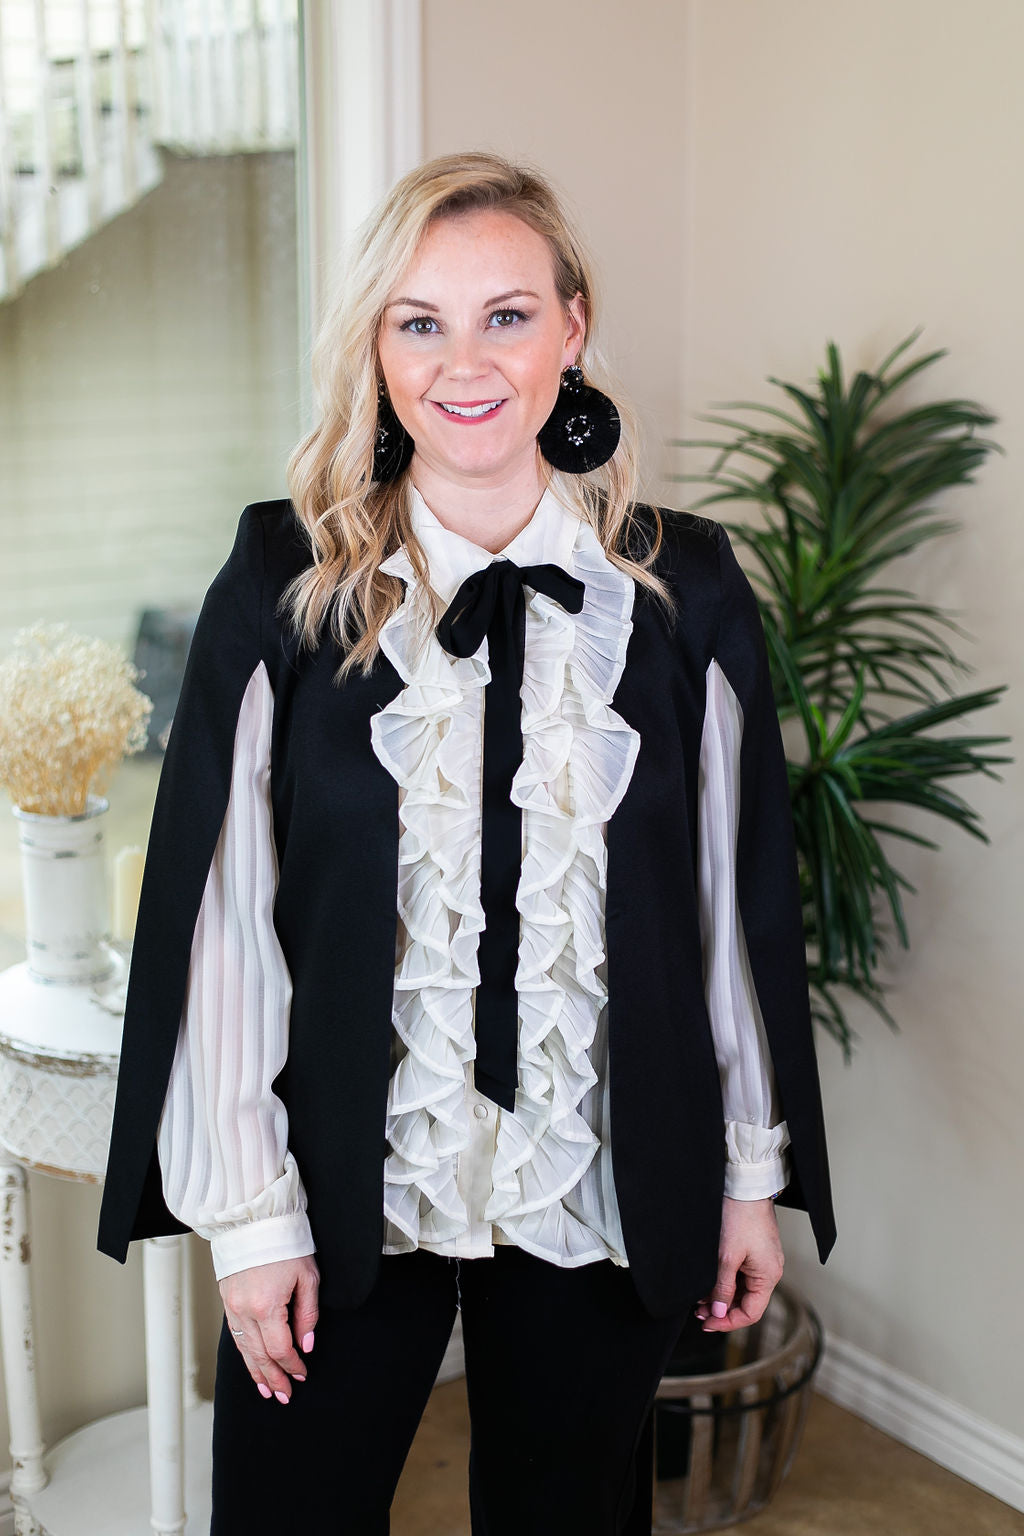 Serious Business Cape Blazer in Black - Giddy Up Glamour Boutique